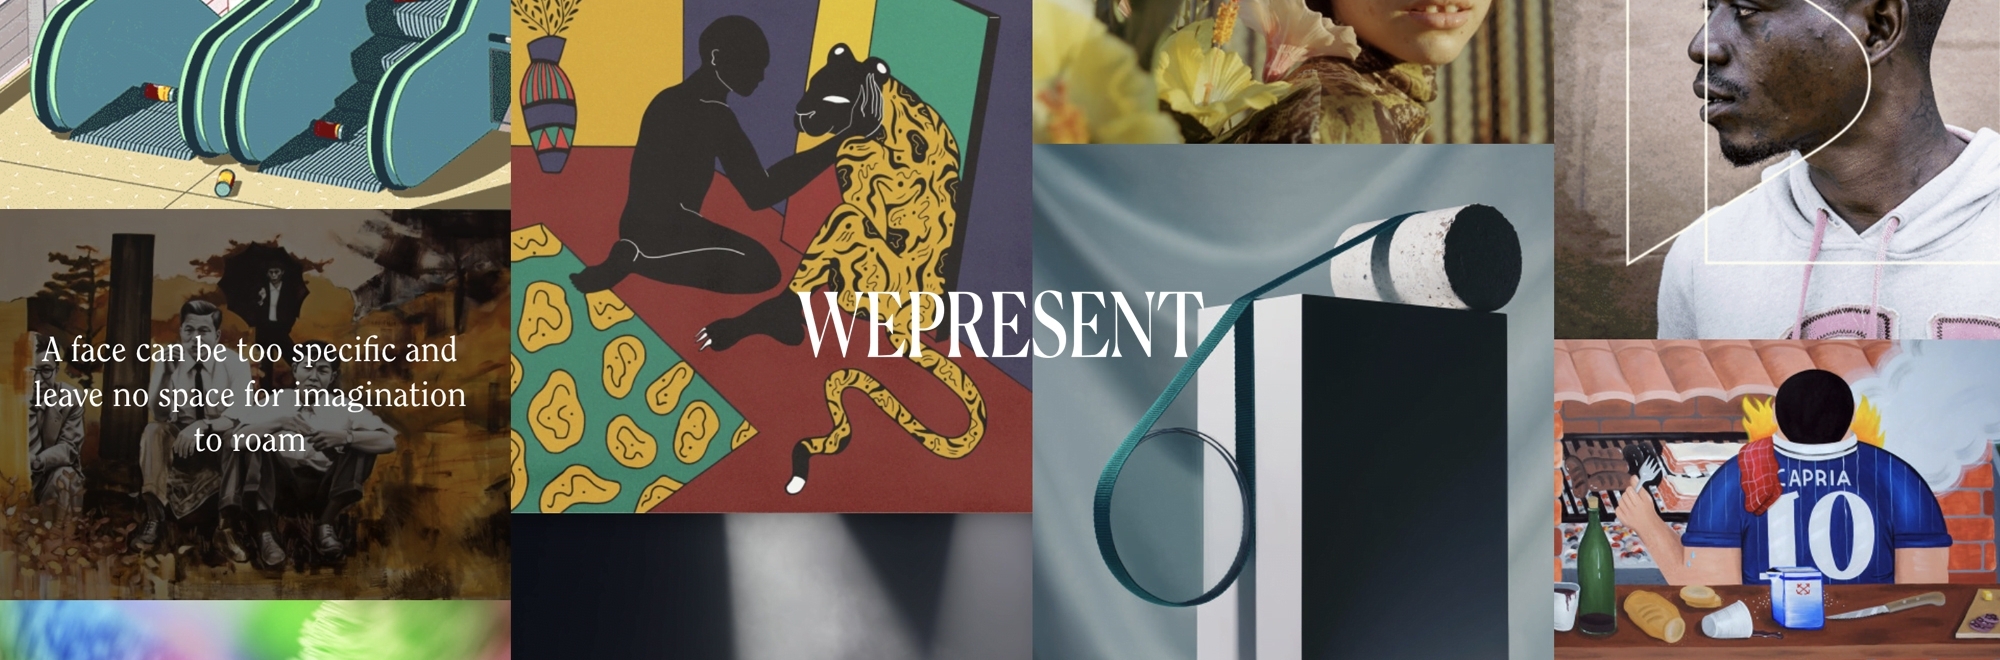 How WeTransfer is engaging its users creatively to become an inspirational platform in its own right